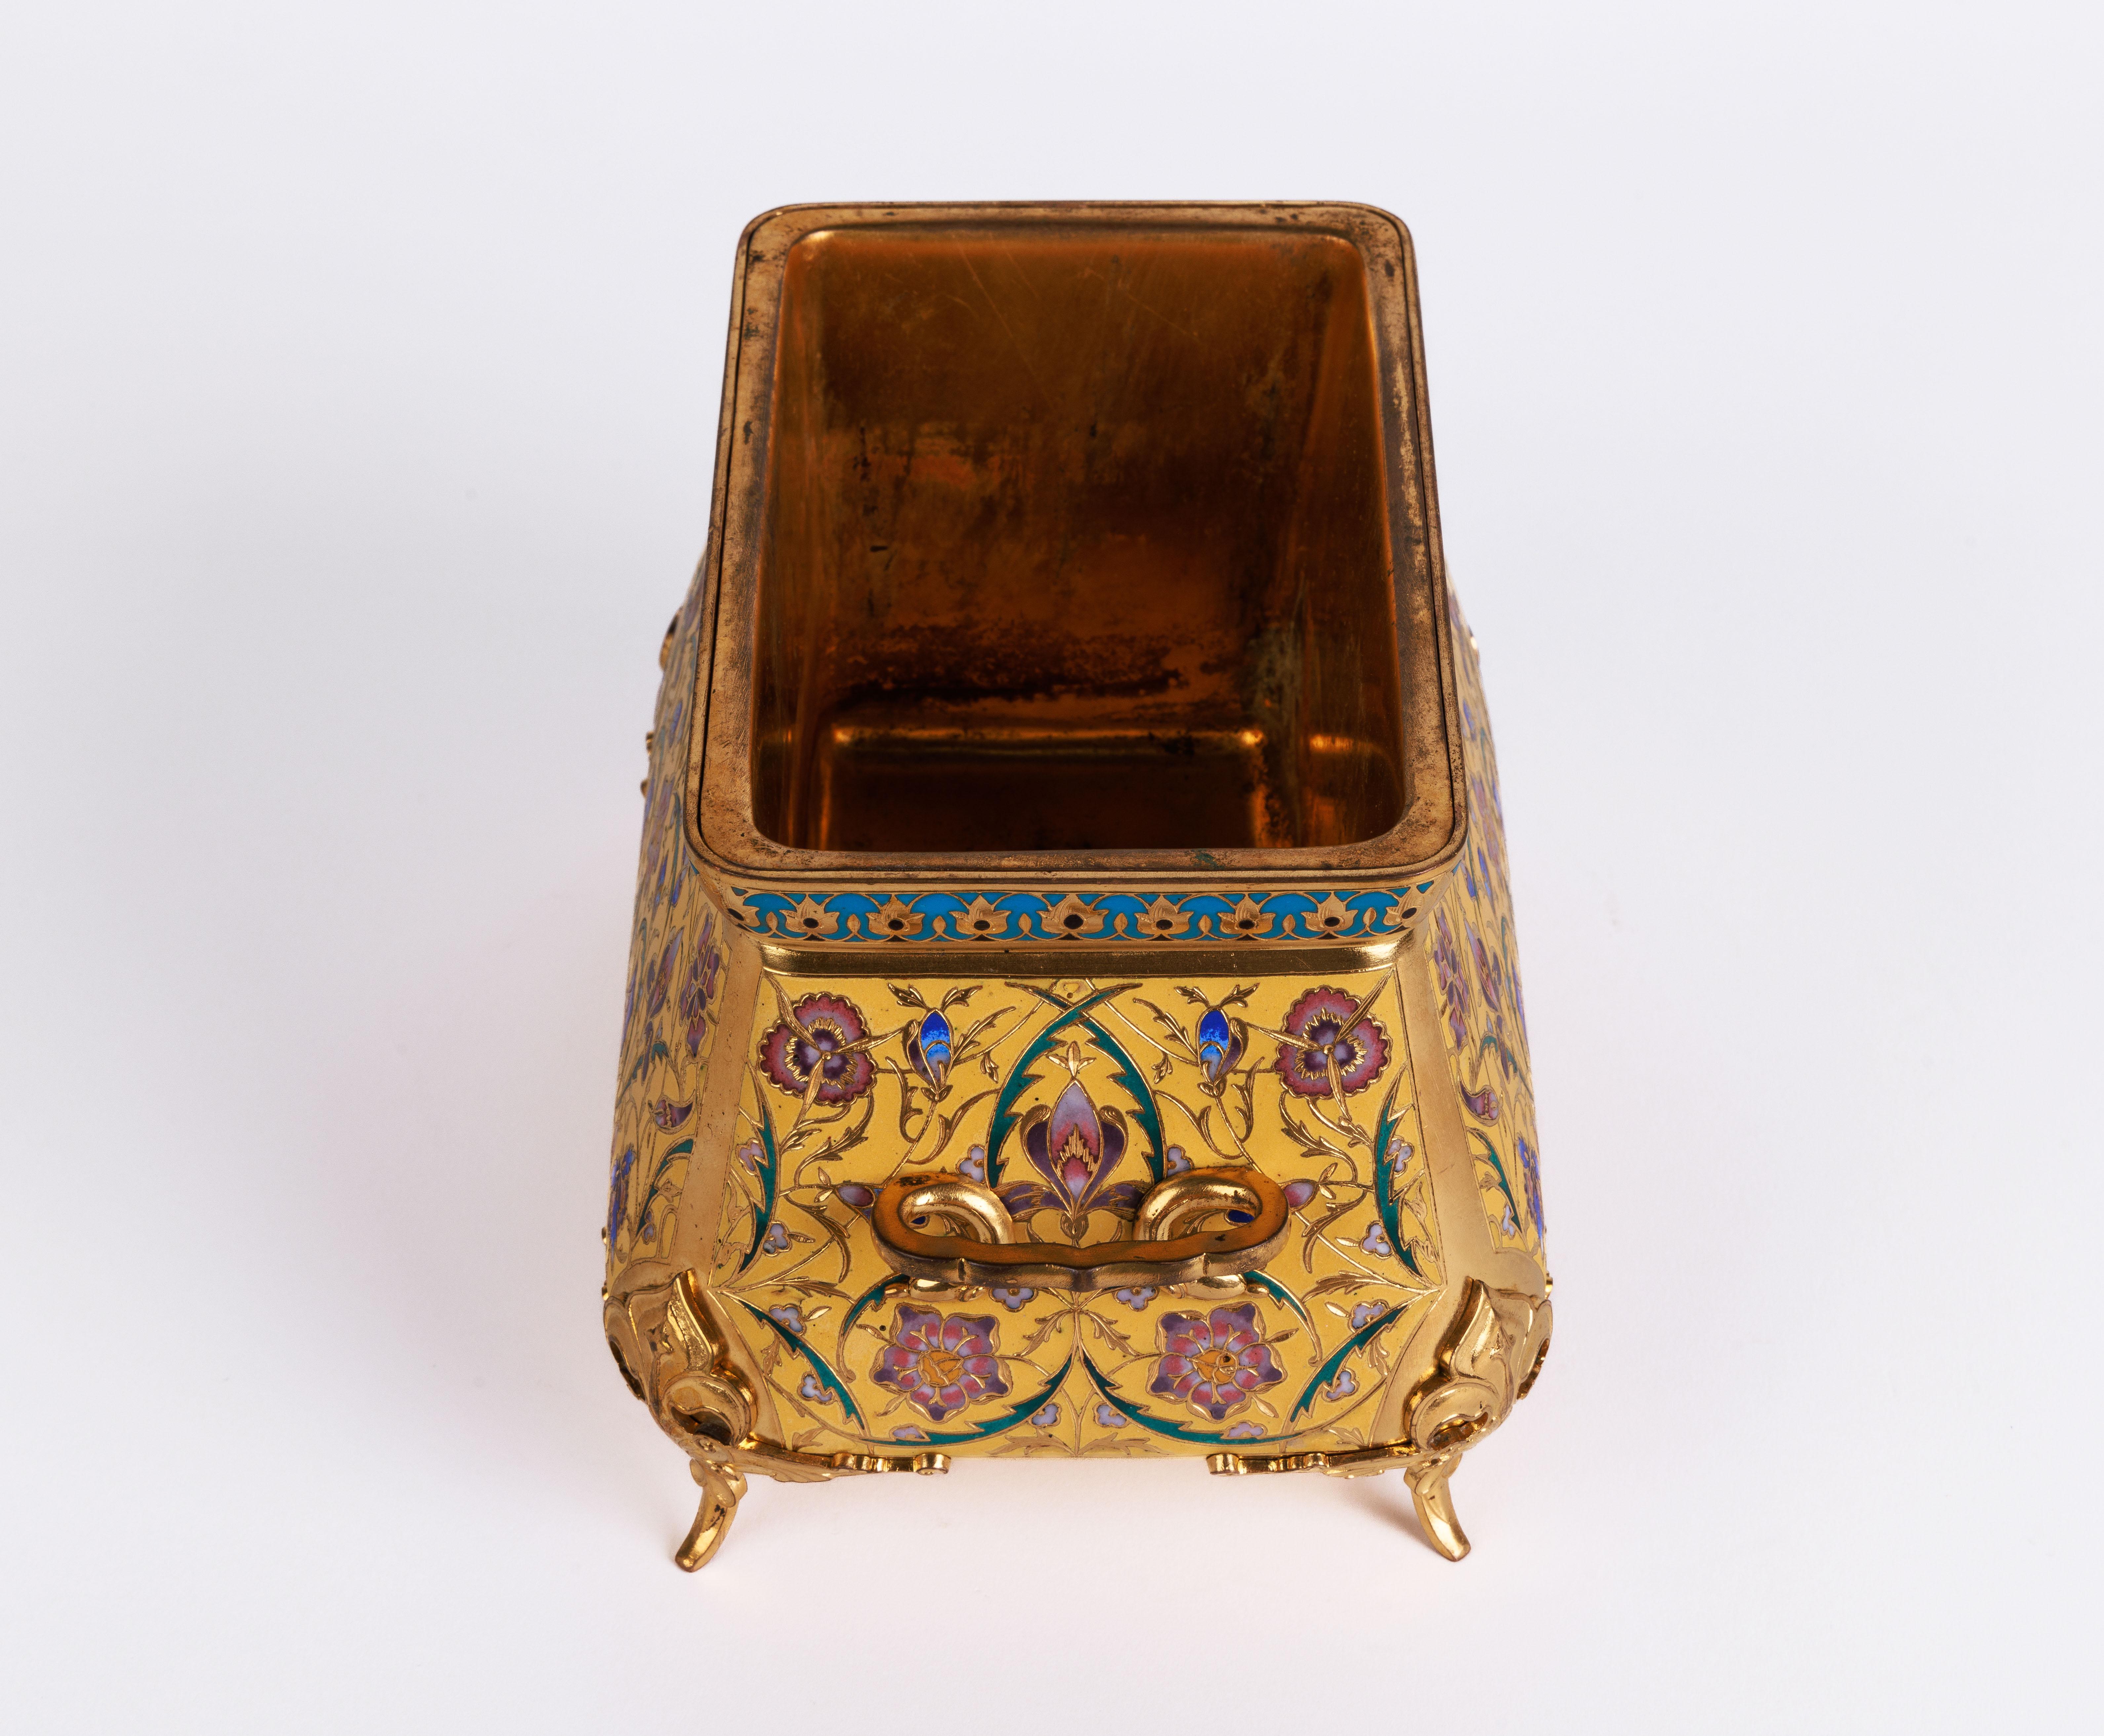 Ferdinand Barbedienne, a French Ormolu and Champleve Enamel Jardiniere, C. 1870 For Sale 5